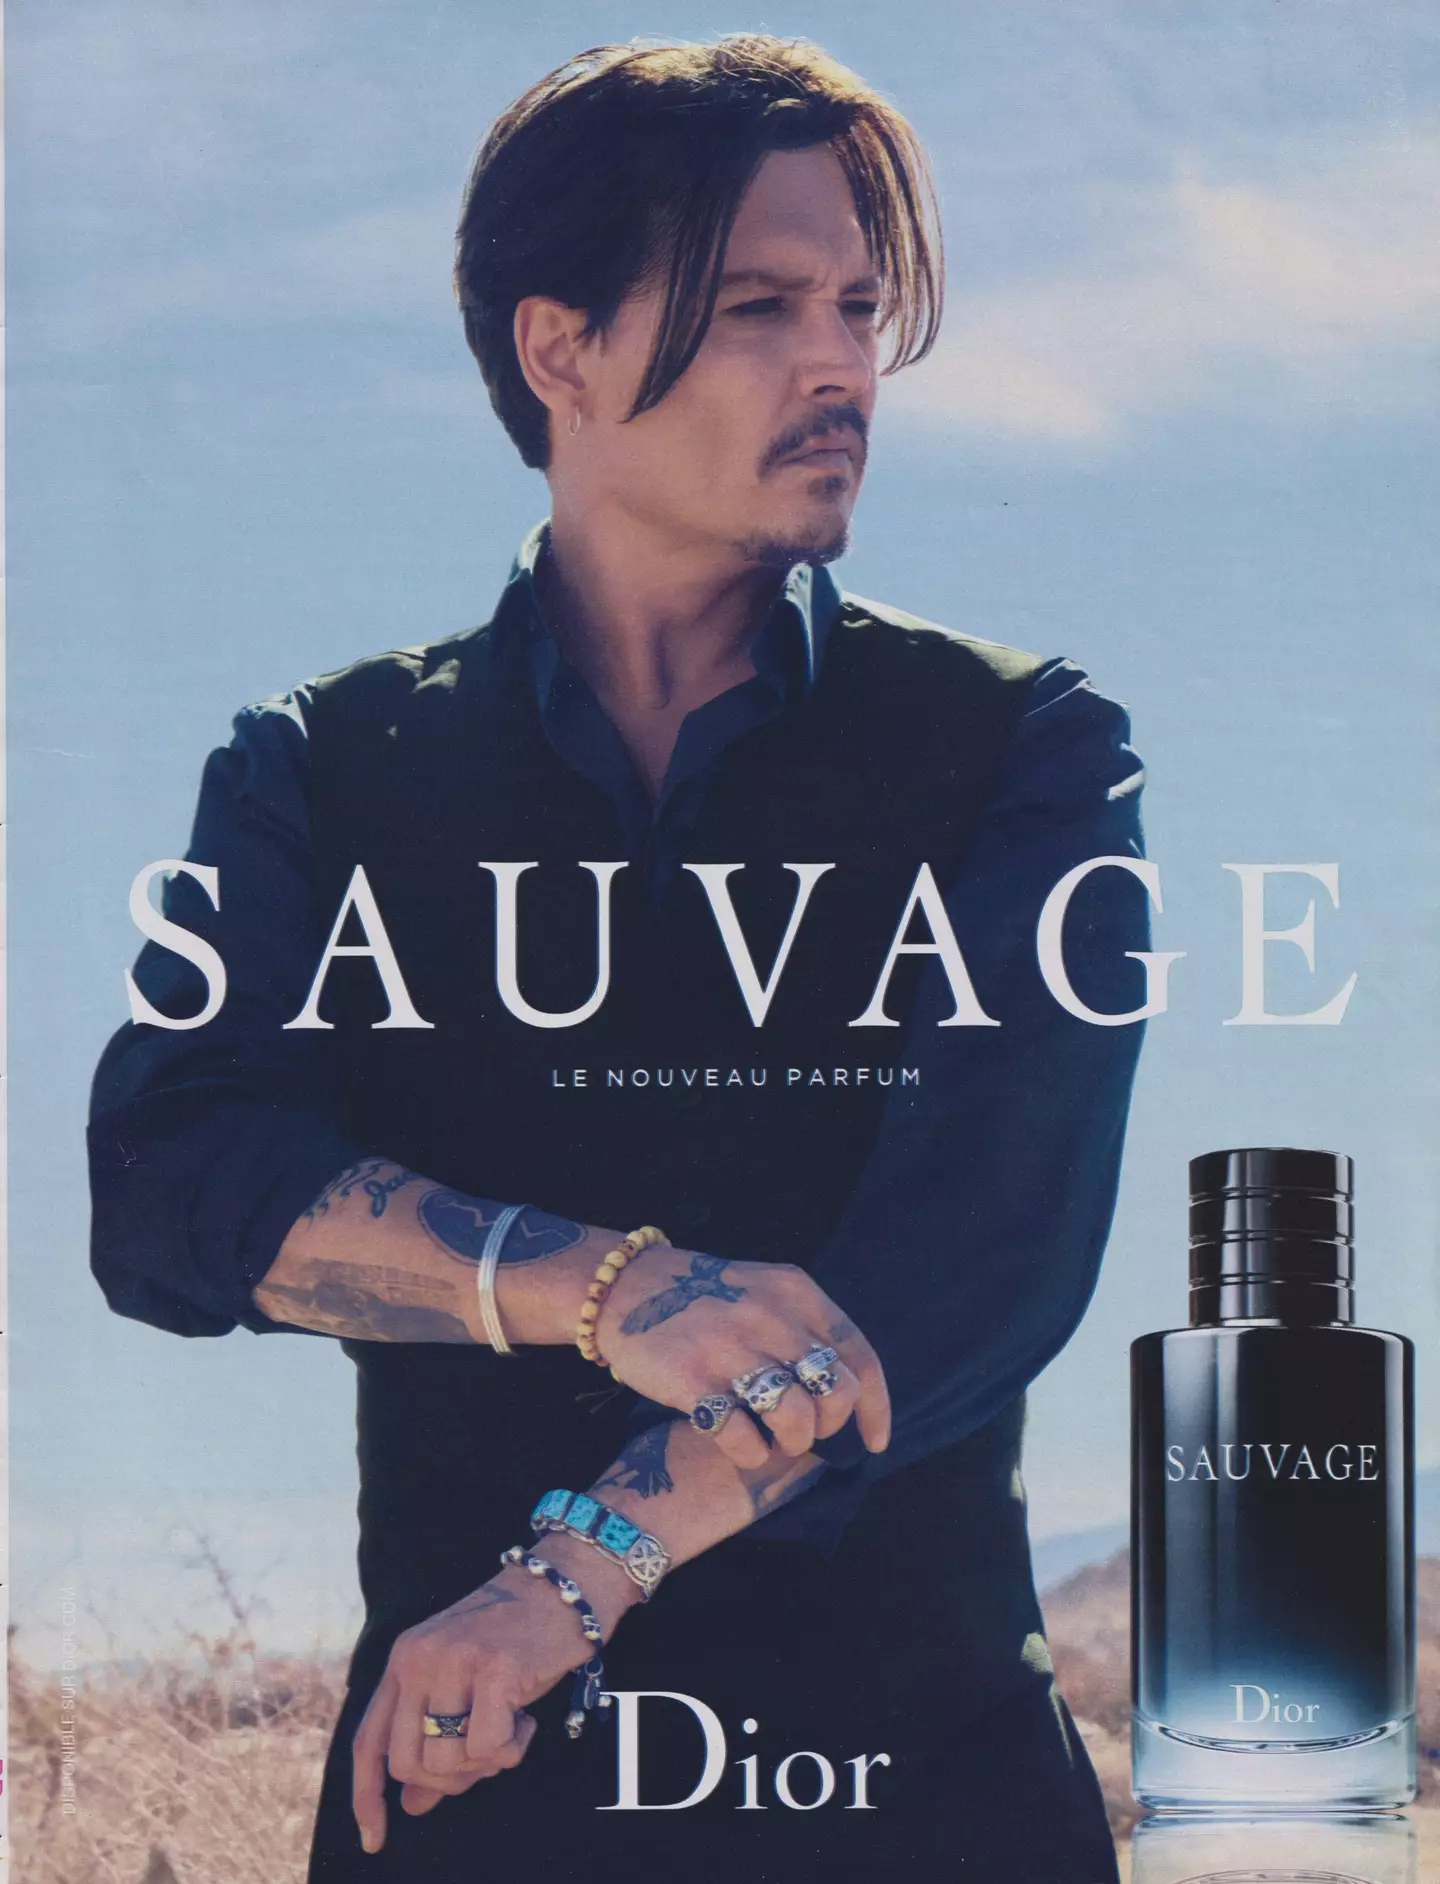 Johnny Depp has been the face of Dior Sauvage since 2015.